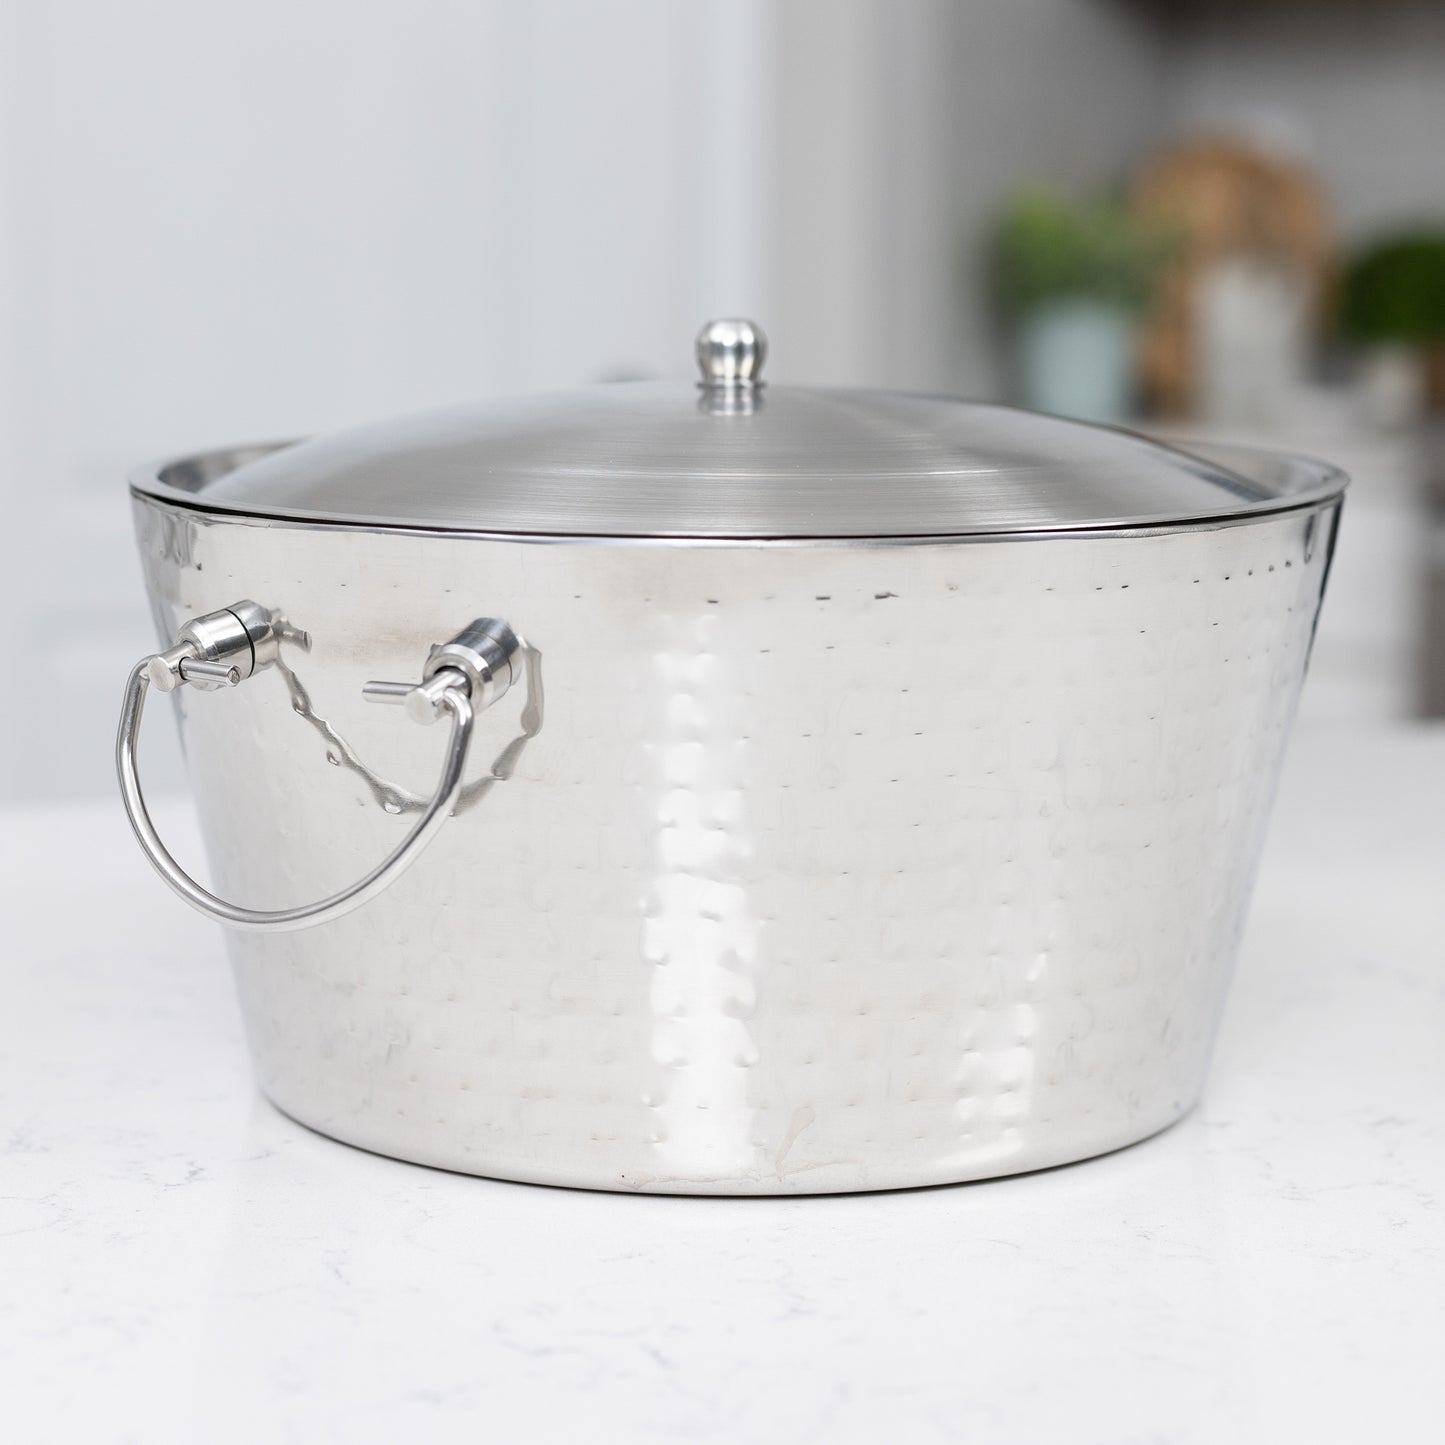 Personalized Ice Bucket with Lid Insulated Stainless Steel Hammered - Anchored